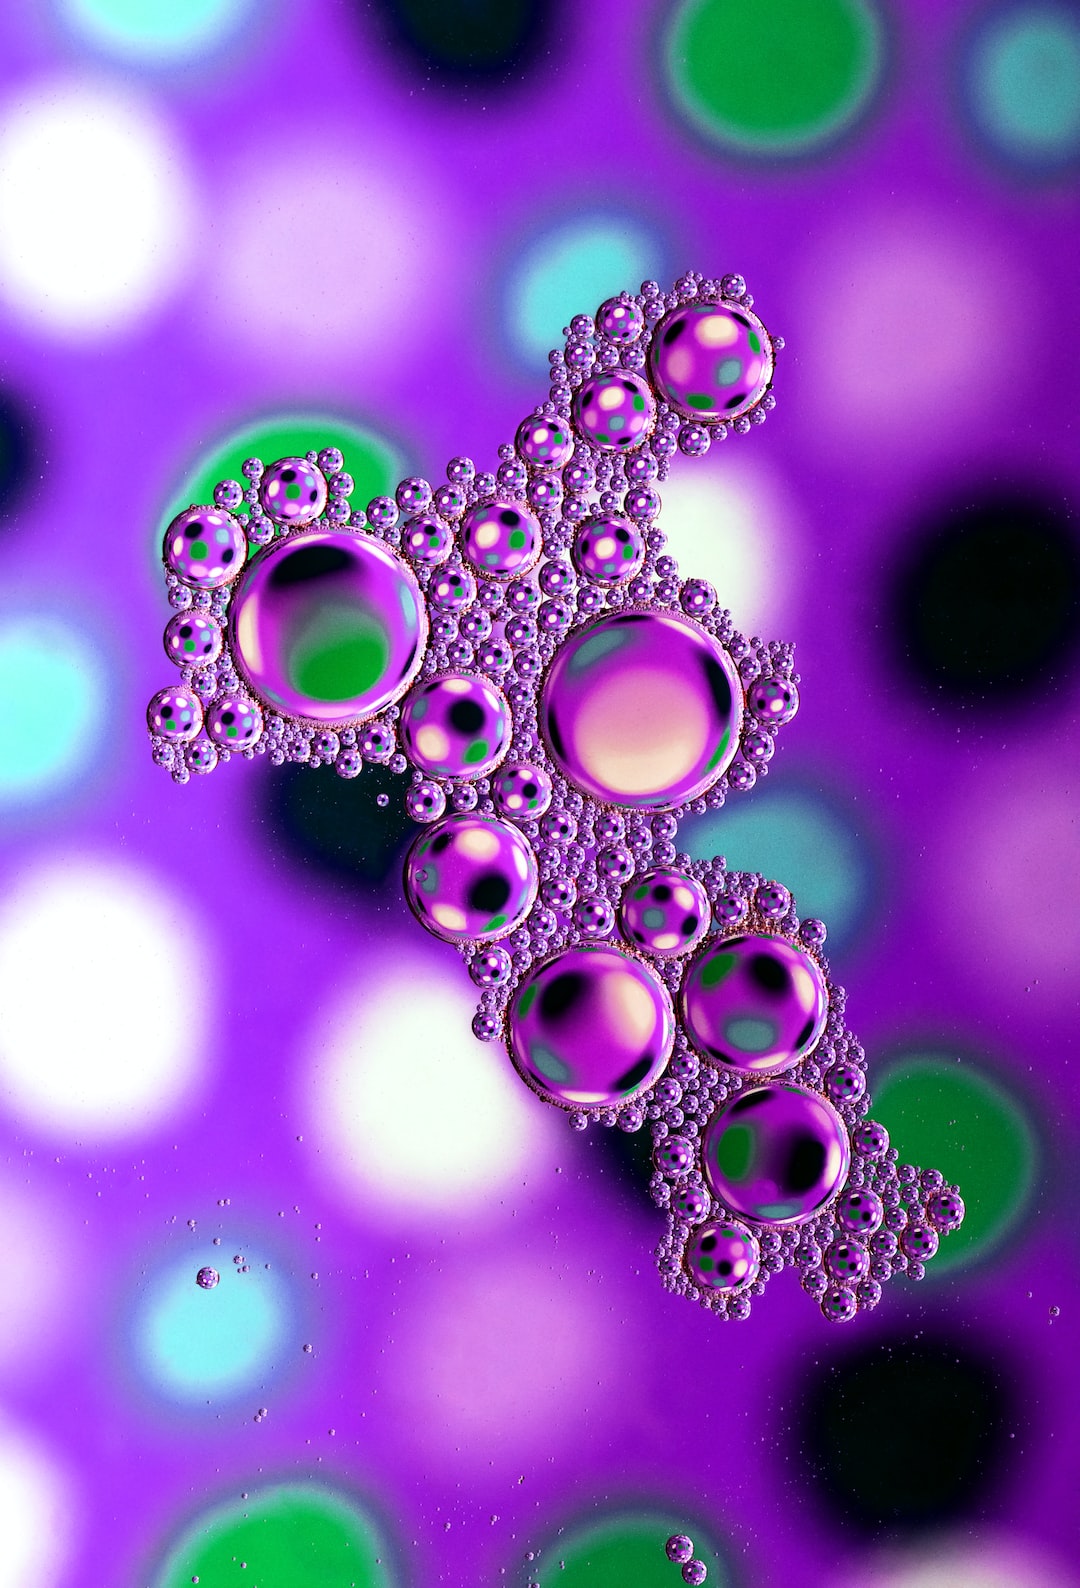 Purple oil drops. Droplets of rice bran oil floating on water above a colourful background.